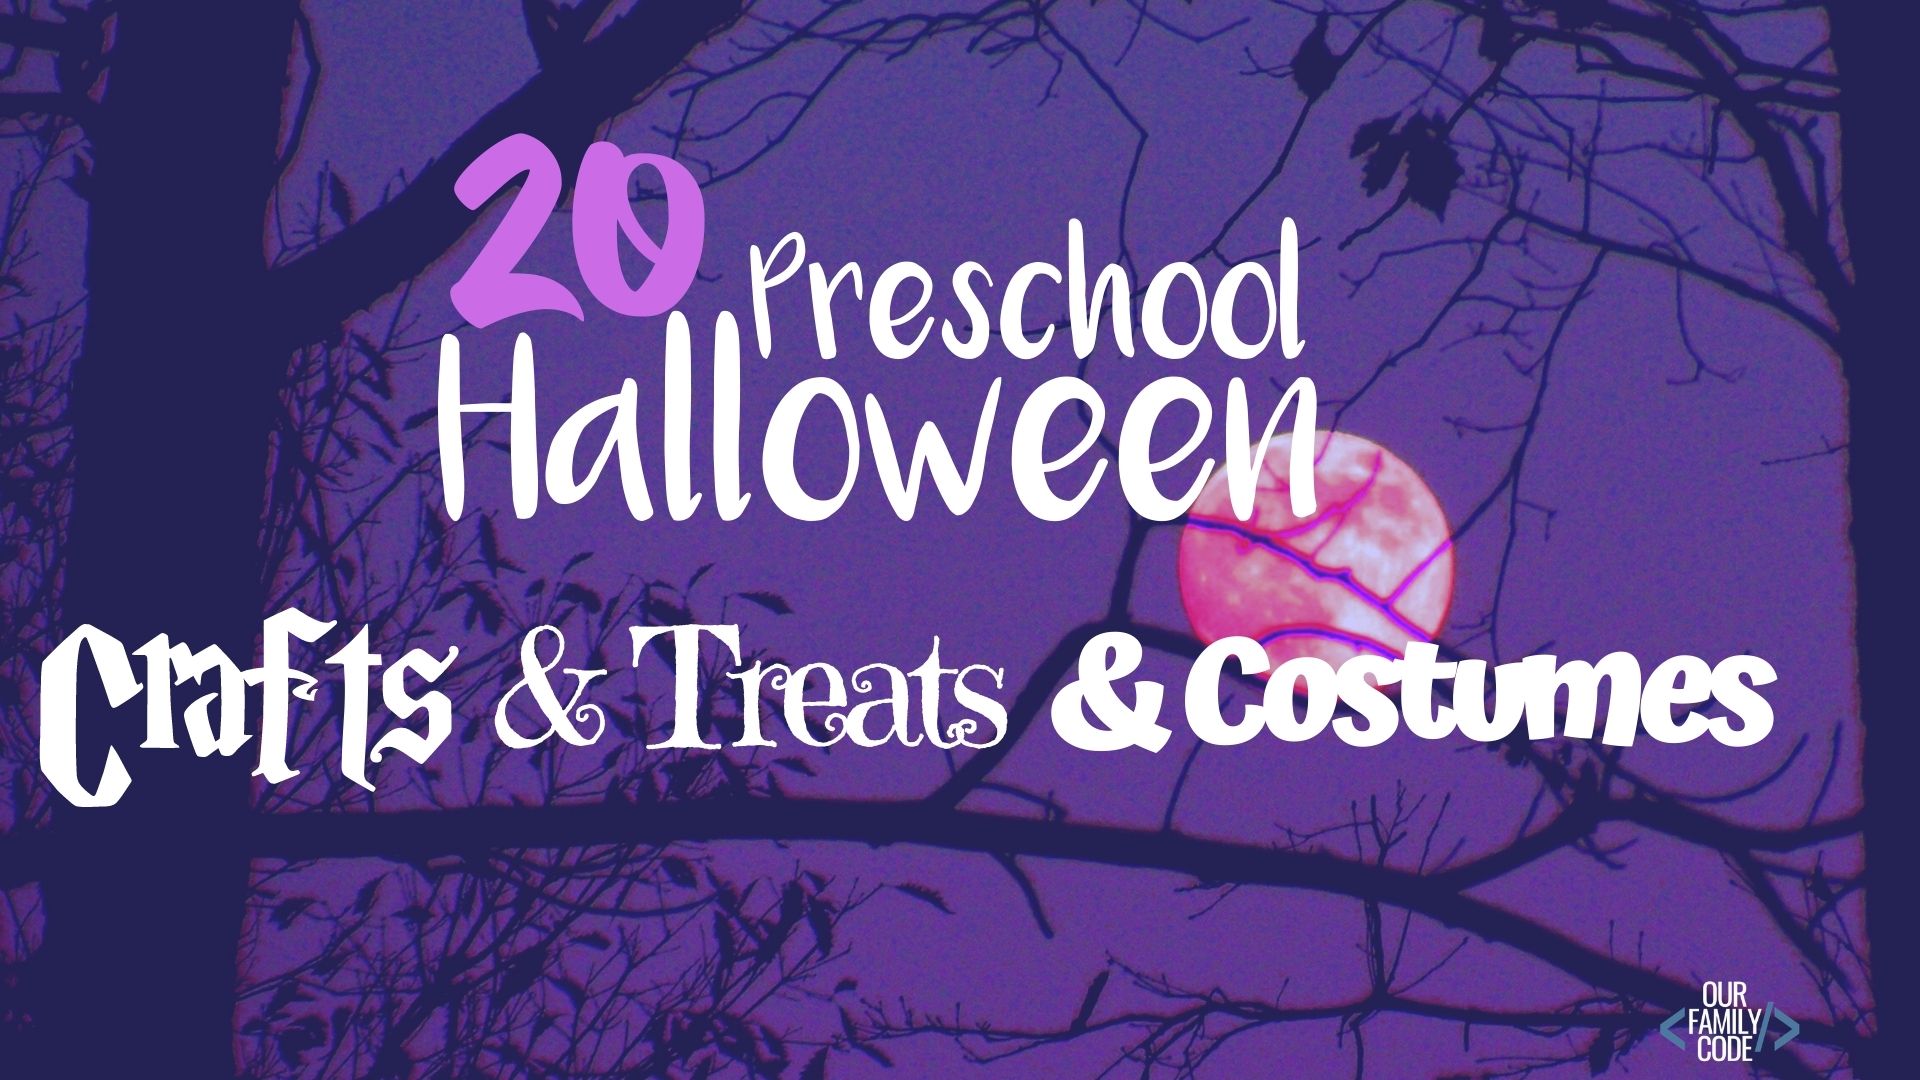 BH Halloween Crafts, Treats, & Costumes for Kids2